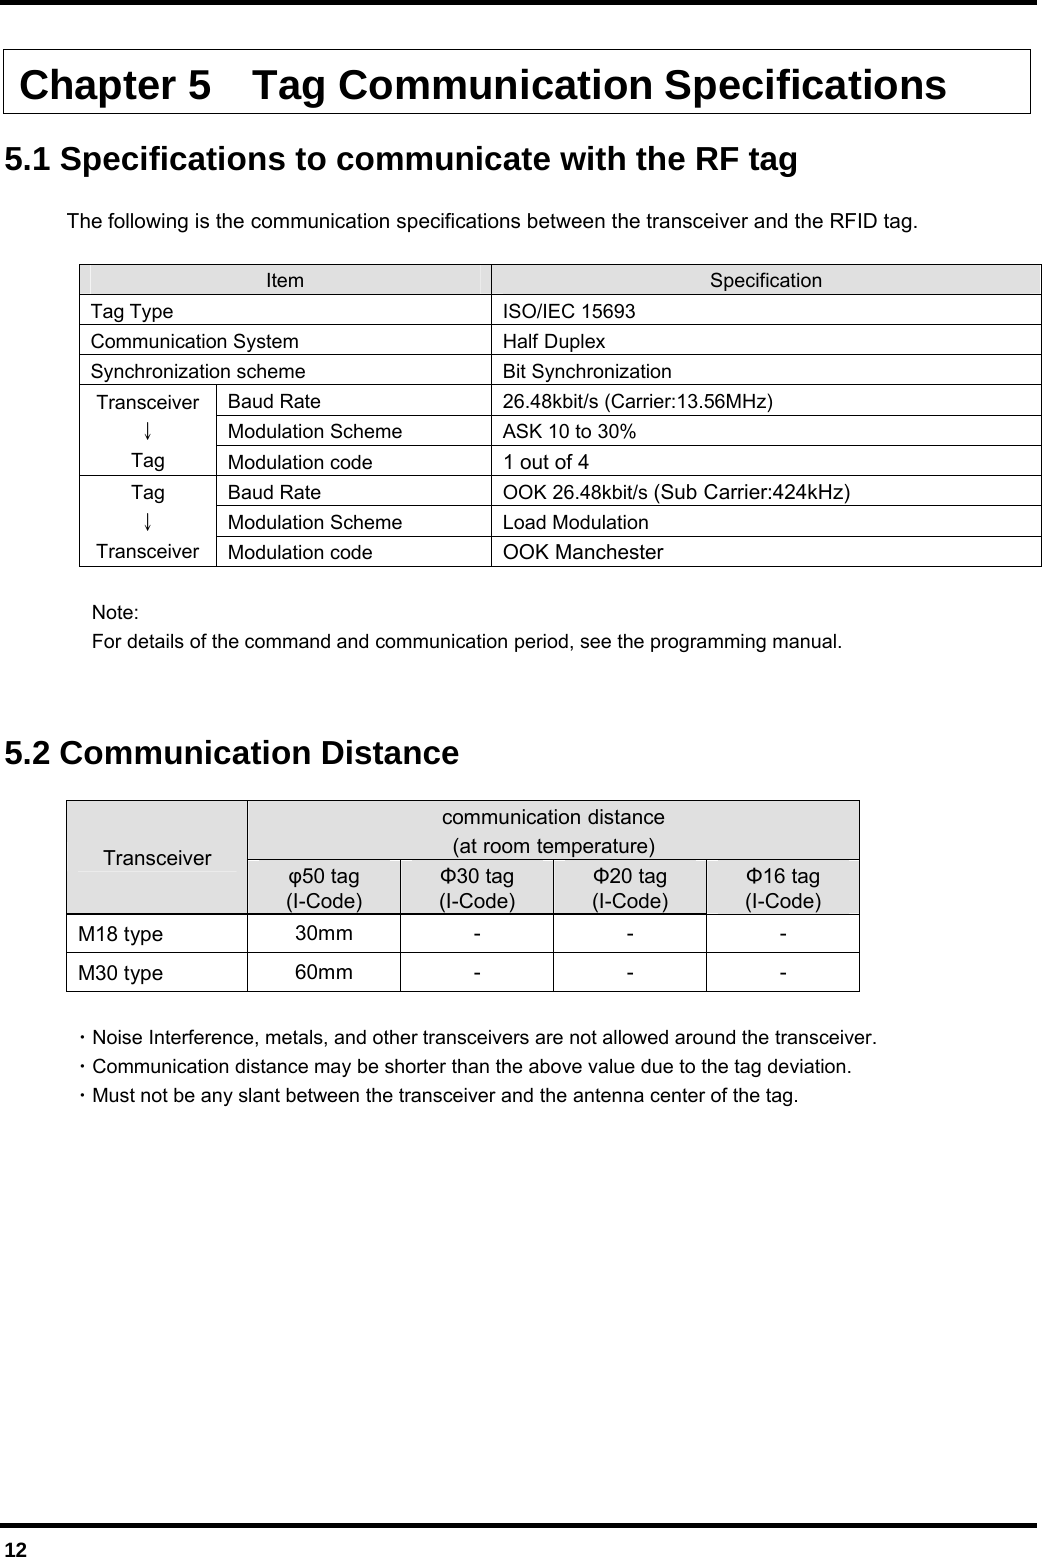  12  Chapter 5  Tag Communication Specifications  5.1 Specifications to communicate with the RF tag    The following is the communication specifications between the transceiver and the RFID tag.  Item  Specification Tag Type  ISO/IEC 15693 Communication System  Half Duplex Synchronization scheme  Bit Synchronization Baud Rate  26.48kbit/s (Carrier:13.56MHz) Modulation Scheme  ASK 10 to 30% Transceiver ↓ Tag  Modulation code  1 out of 4 Baud Rate  OOK 26.48kbit/s (Sub Carrier:424kHz) Modulation Scheme  Load Modulation Tag ↓ Transceiver  Modulation code  OOK Manchester   Note:   For details of the command and communication period, see the programming manual.    5.2 Communication Distance  communication distance   (at room temperature) Transceiver  50 tag (I-Code) 30 tag (I-Code) 20 tag (I-Code) 16 tag (I-Code) M18 type  30mm - - - M30 type  60mm - - -   ・Noise Interference, metals, and other transceivers are not allowed around the transceiver. ・Communication distance may be shorter than the above value due to the tag deviation. ・Must not be any slant between the transceiver and the antenna center of the tag.    